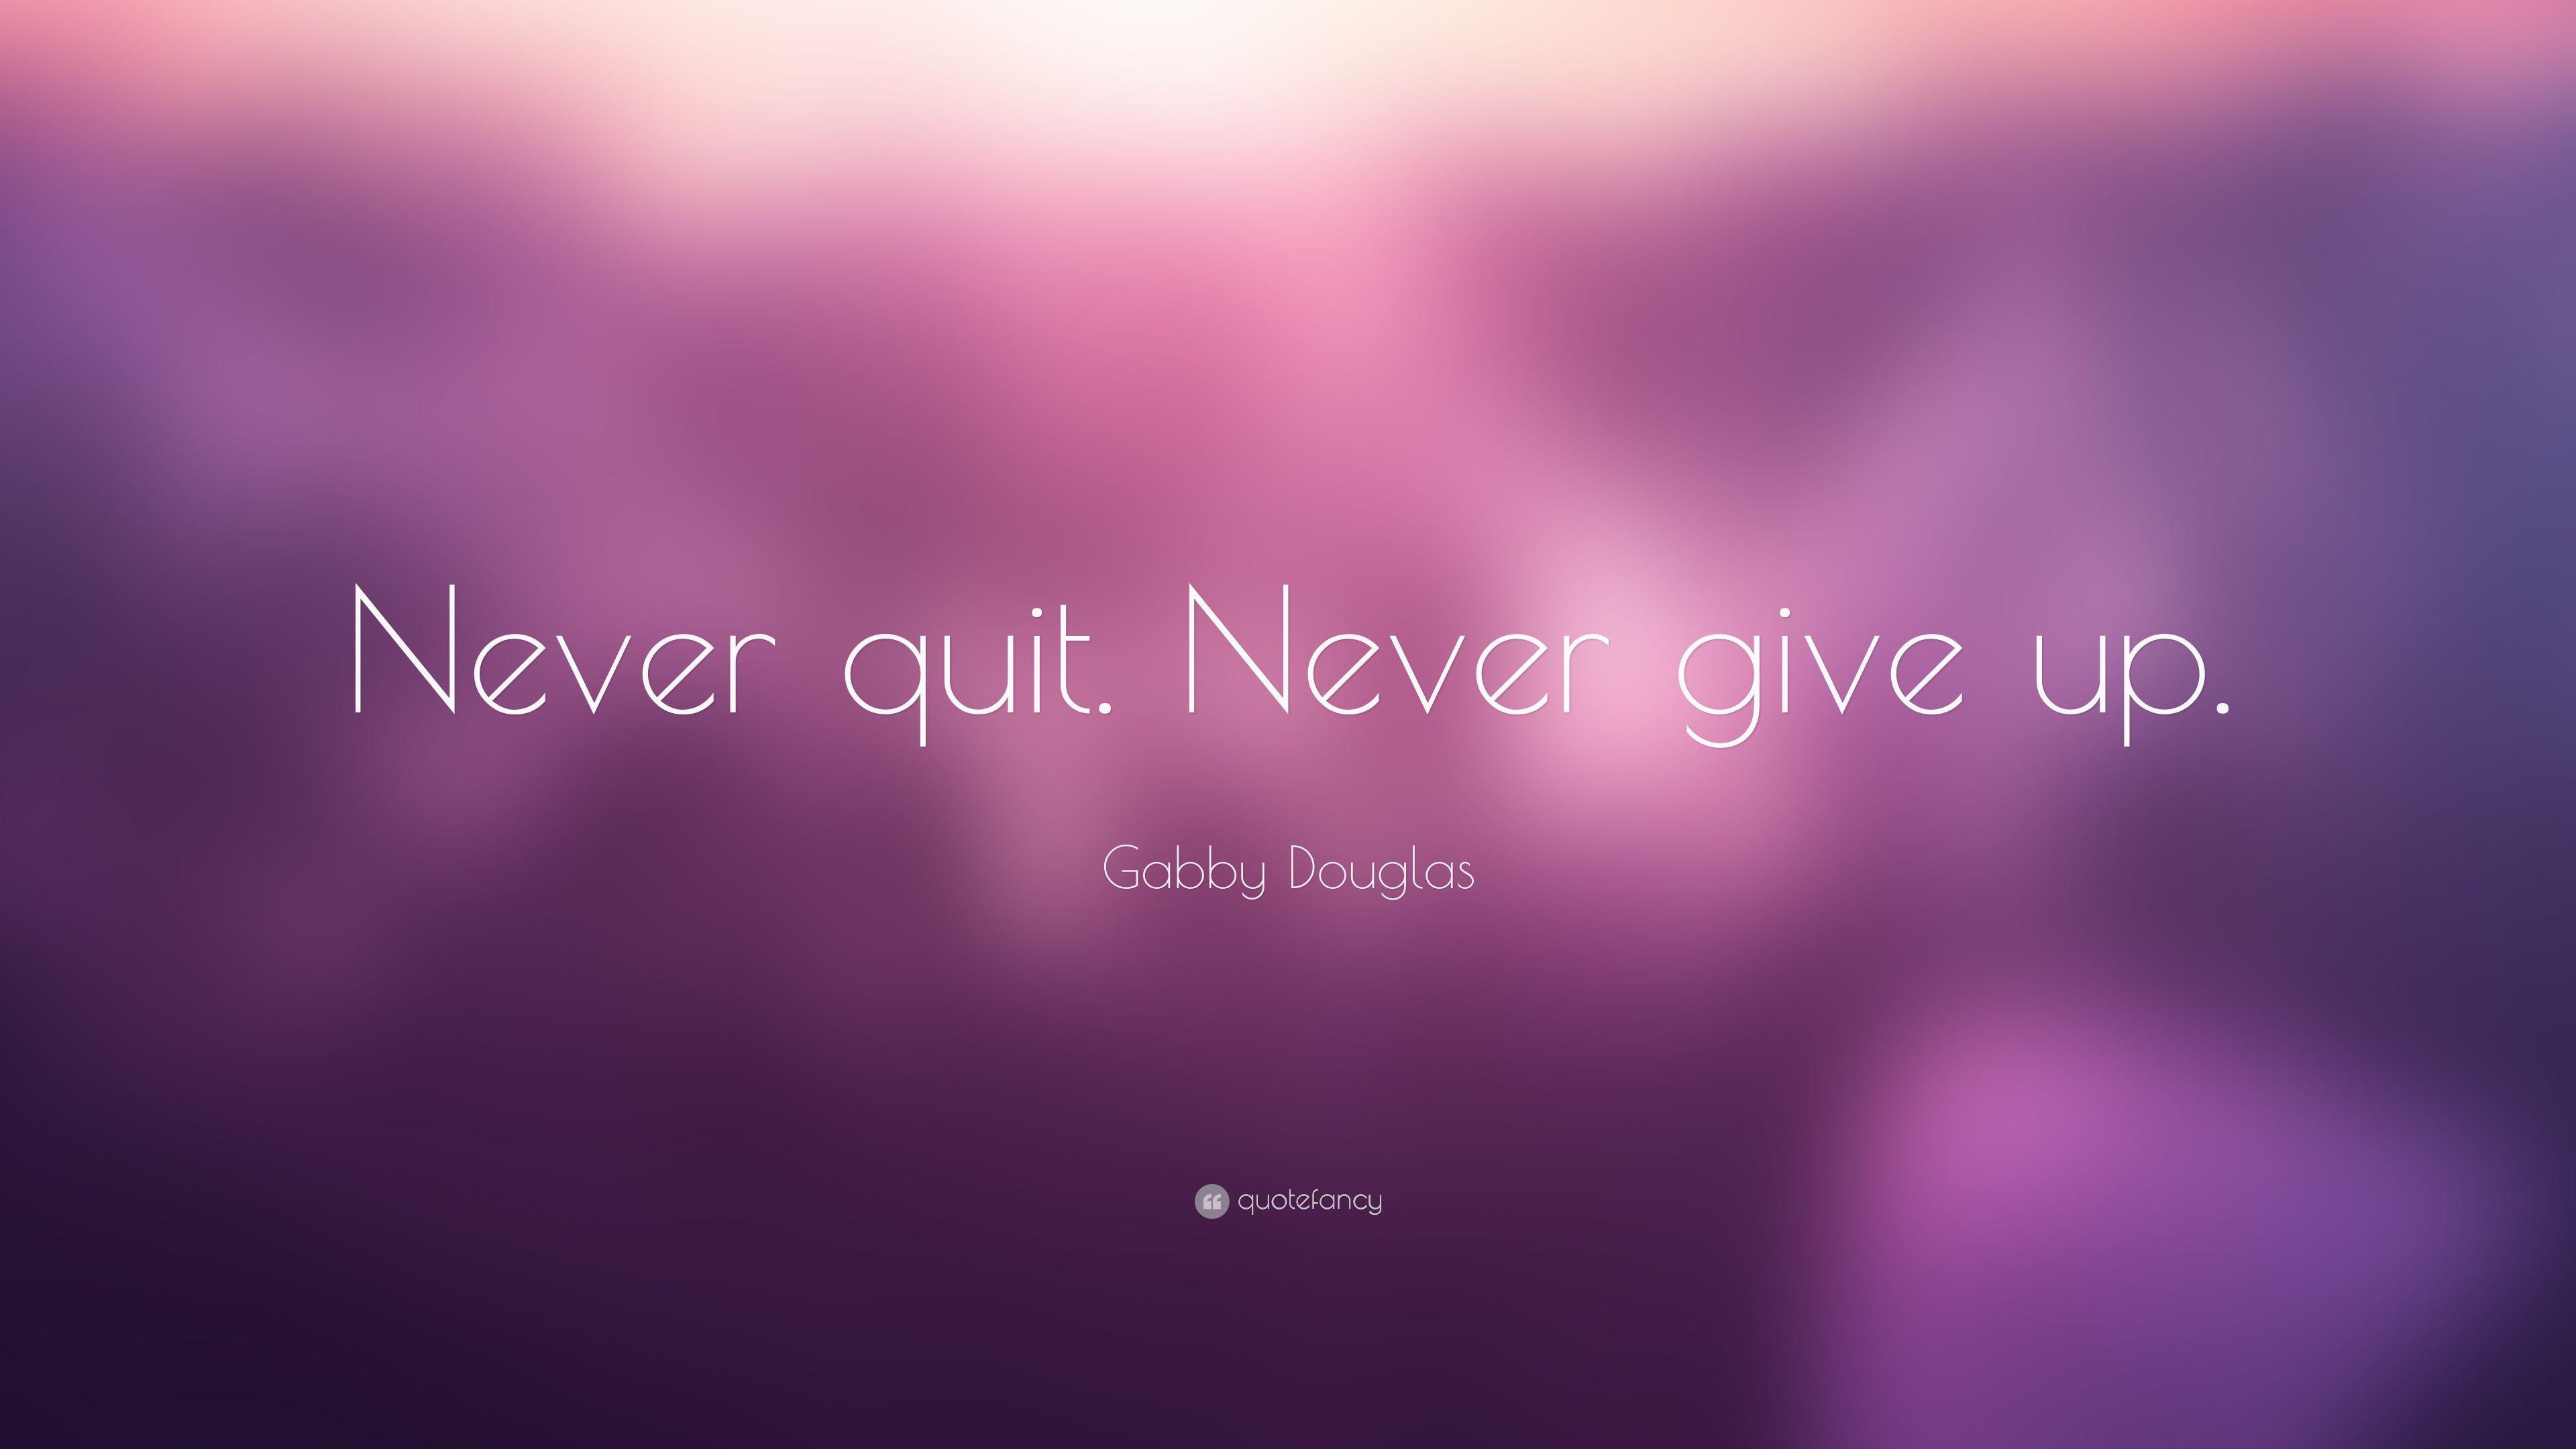 Gabby Douglas Quote: “Never quit. Never give up.” (12 wallpaper)